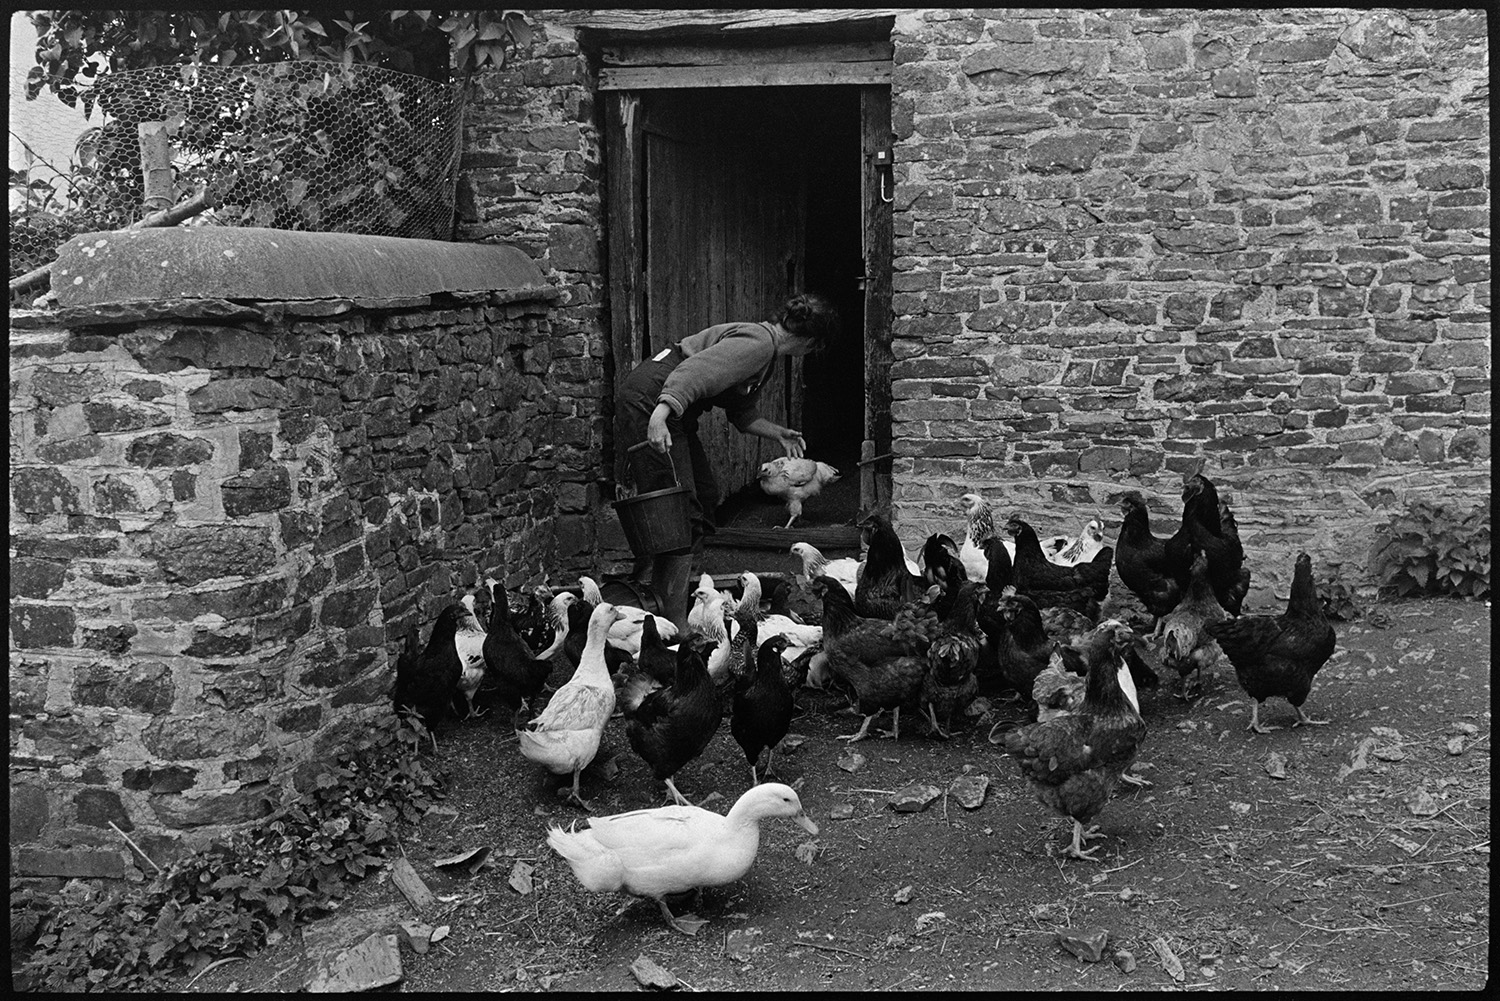 Woman farmer feeding chickens and ducks. 
[Jane Todd feeding chickens and ducks outside a stone barn with a wooden door at Ashwell, Dolton.]